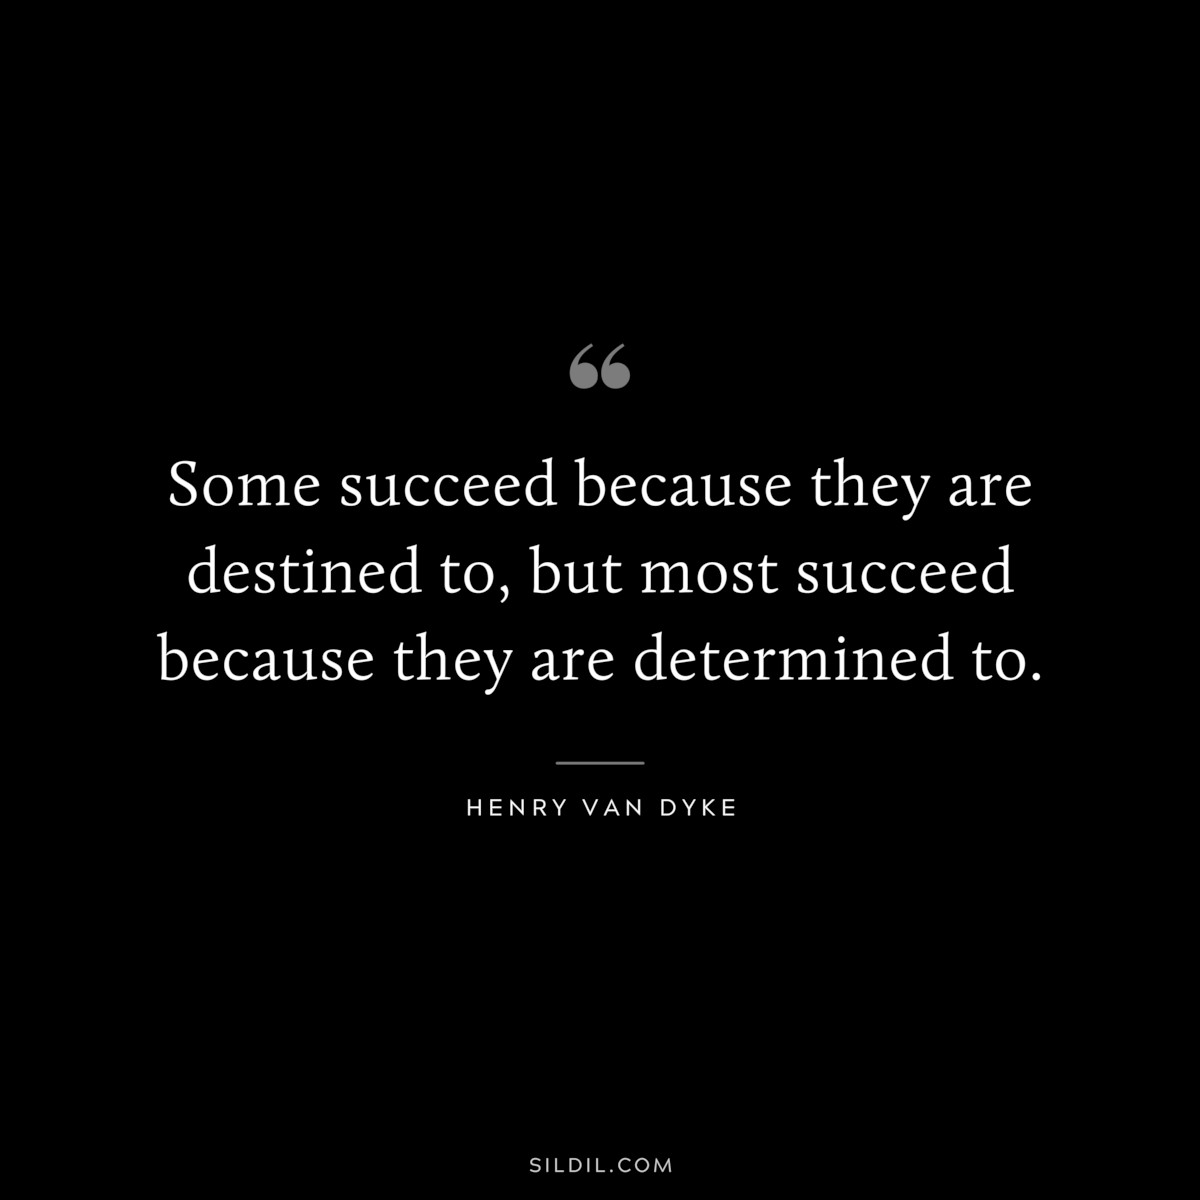 Some succeed because they are destined to, but most succeed because they are determined to. ― Henry Van Dyke